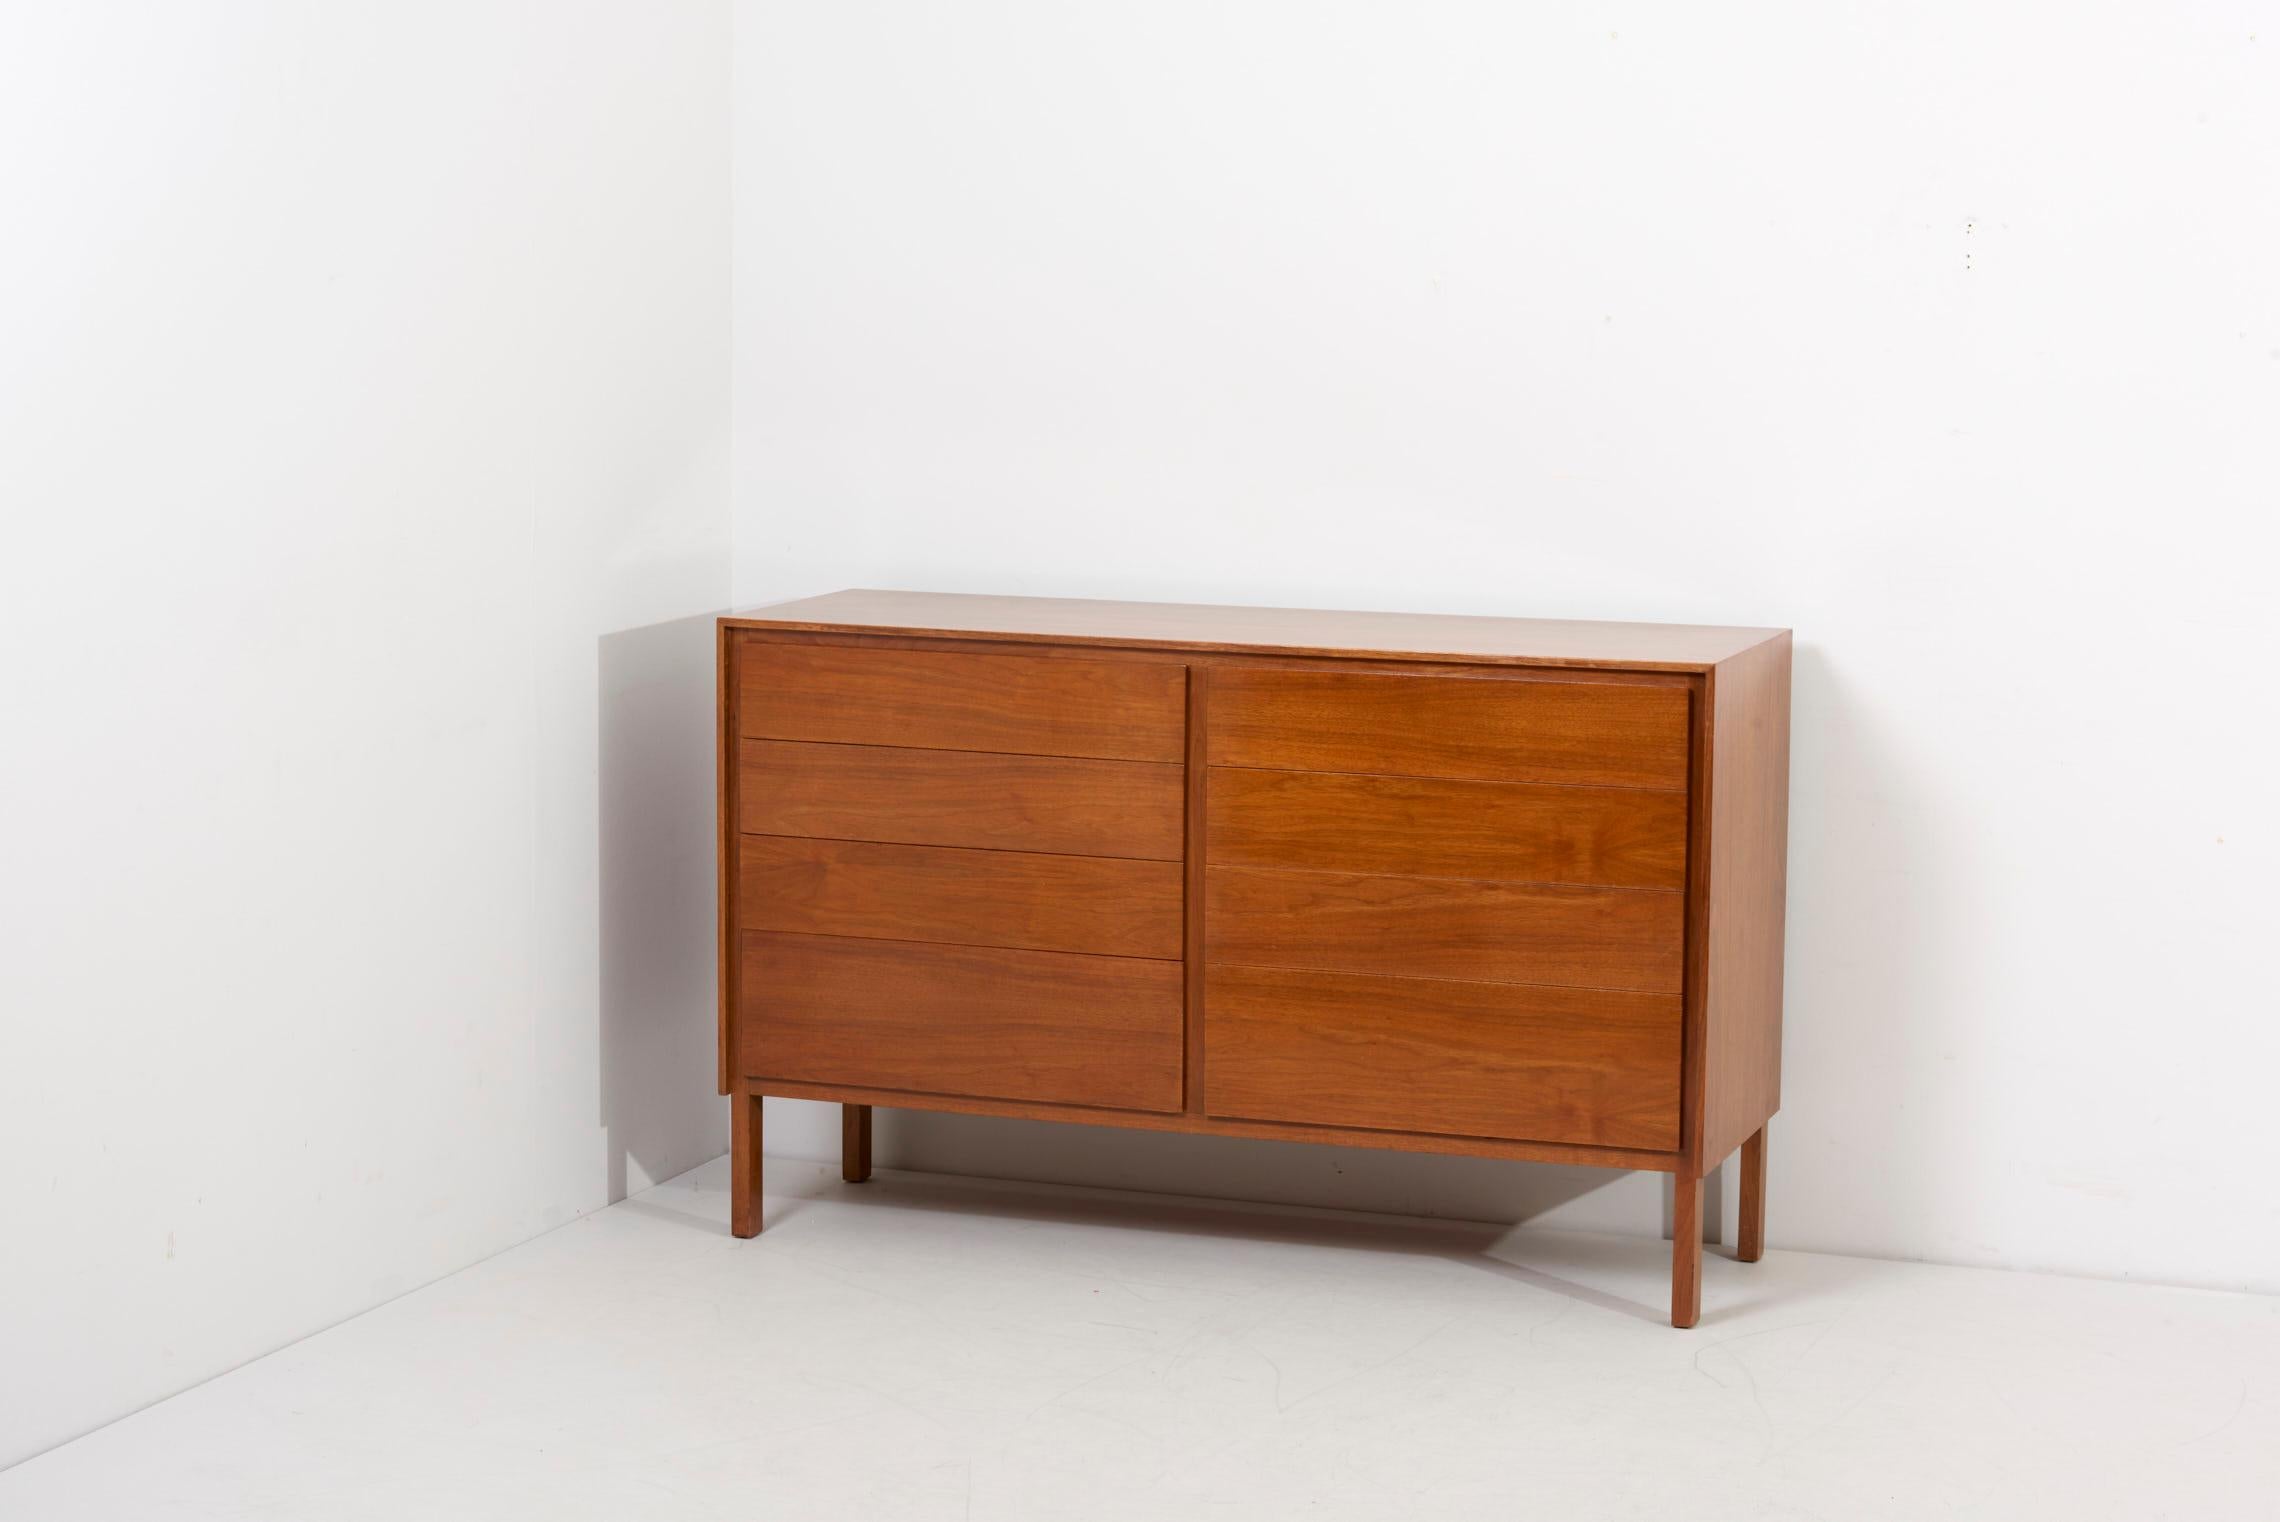 Modernist Sideboard in Walnut by Allan Gould, USA 1960s For Sale 2